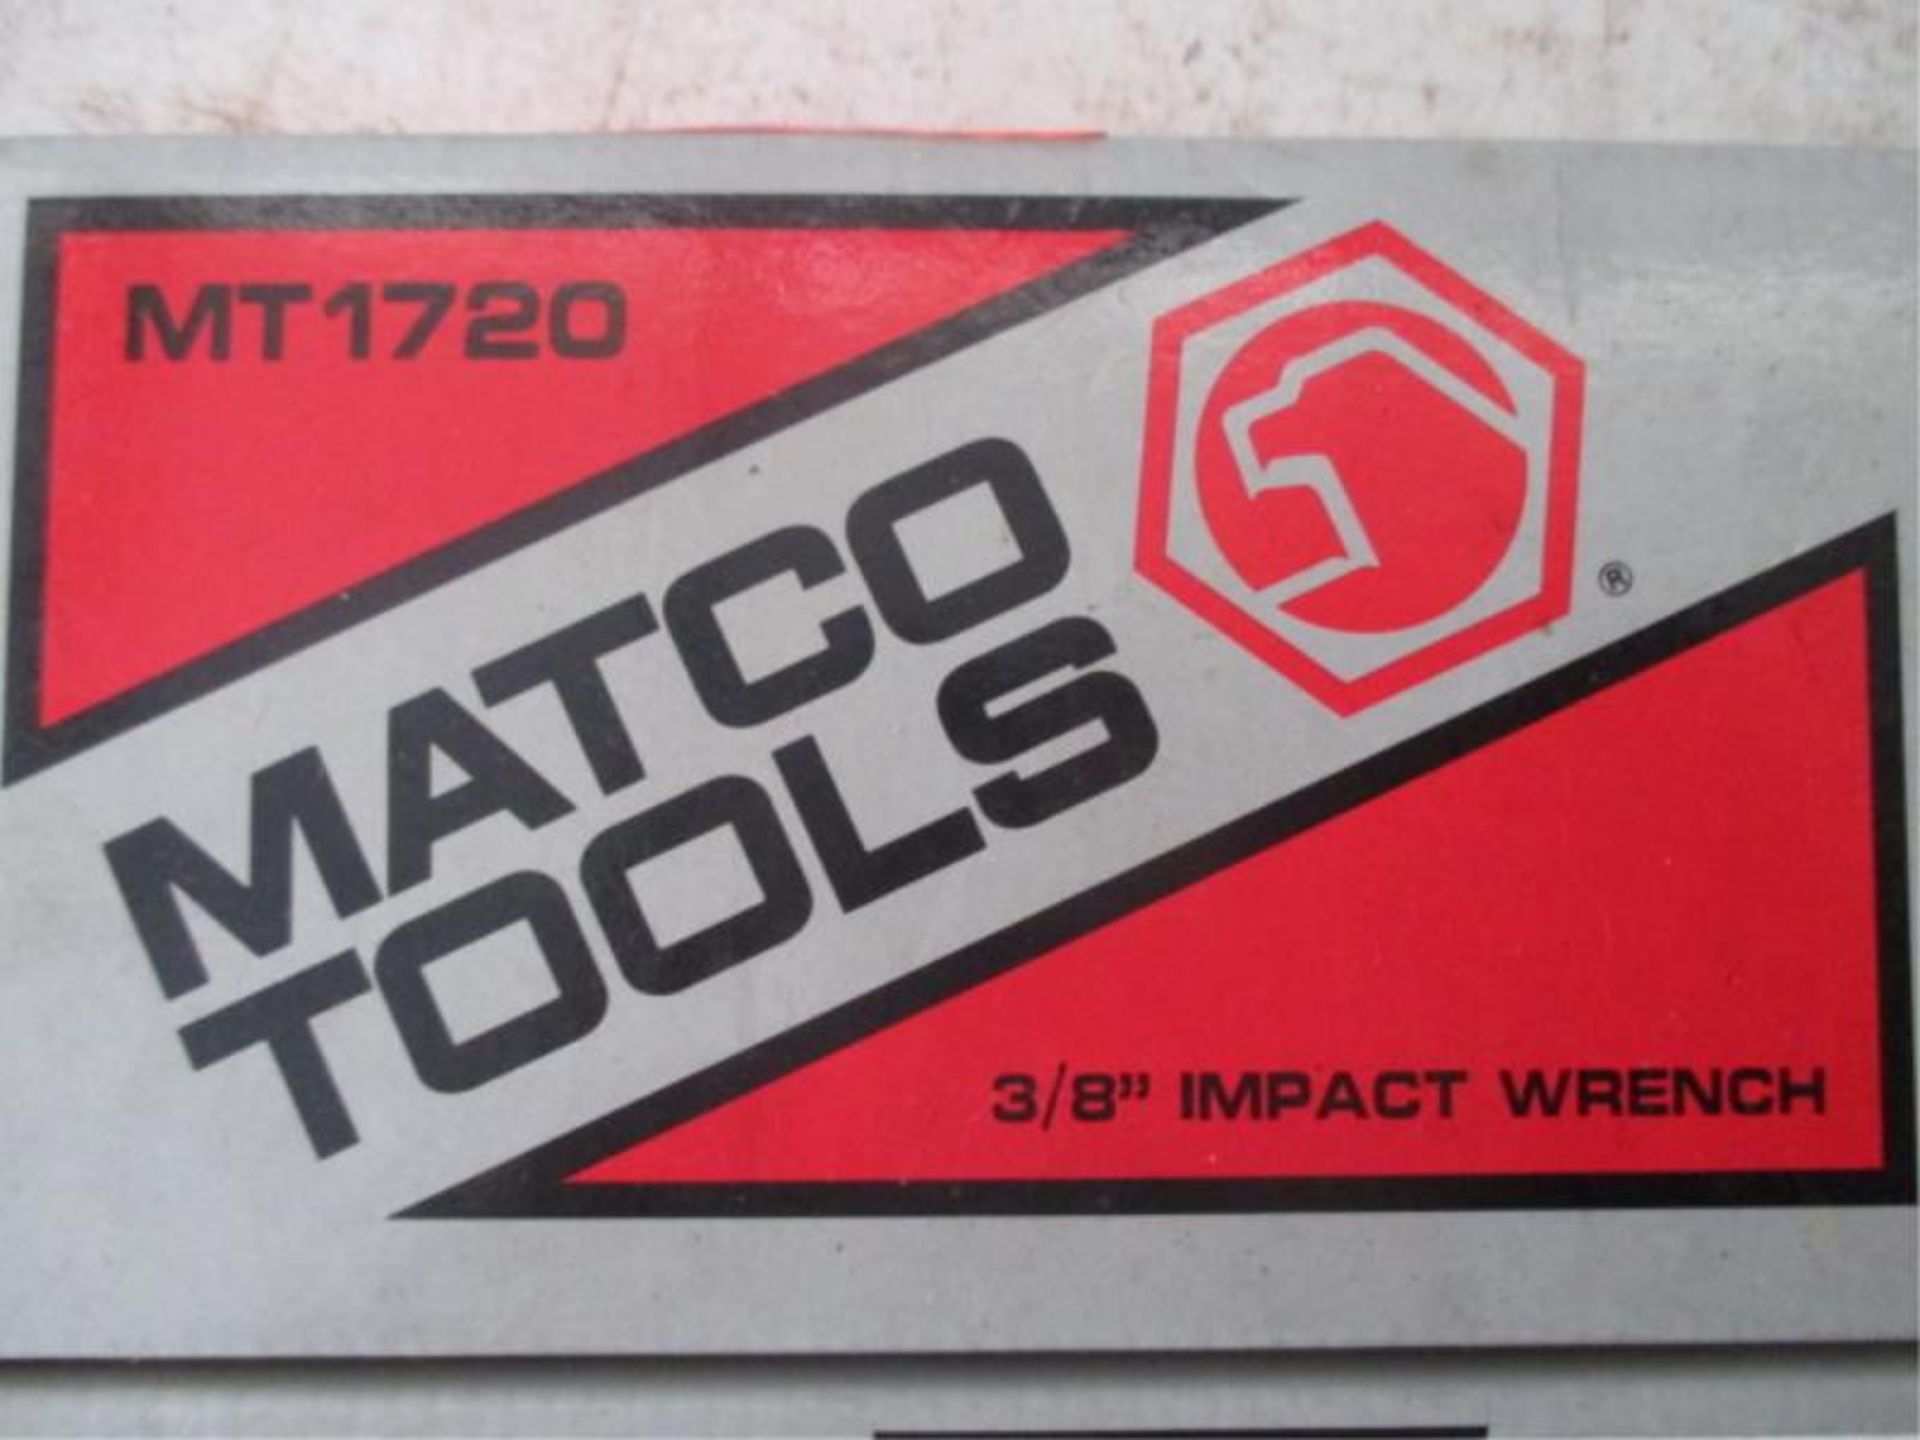 Impact Wrench, Matco Tools, Model: MT1720, New in Box Box - Image 2 of 2